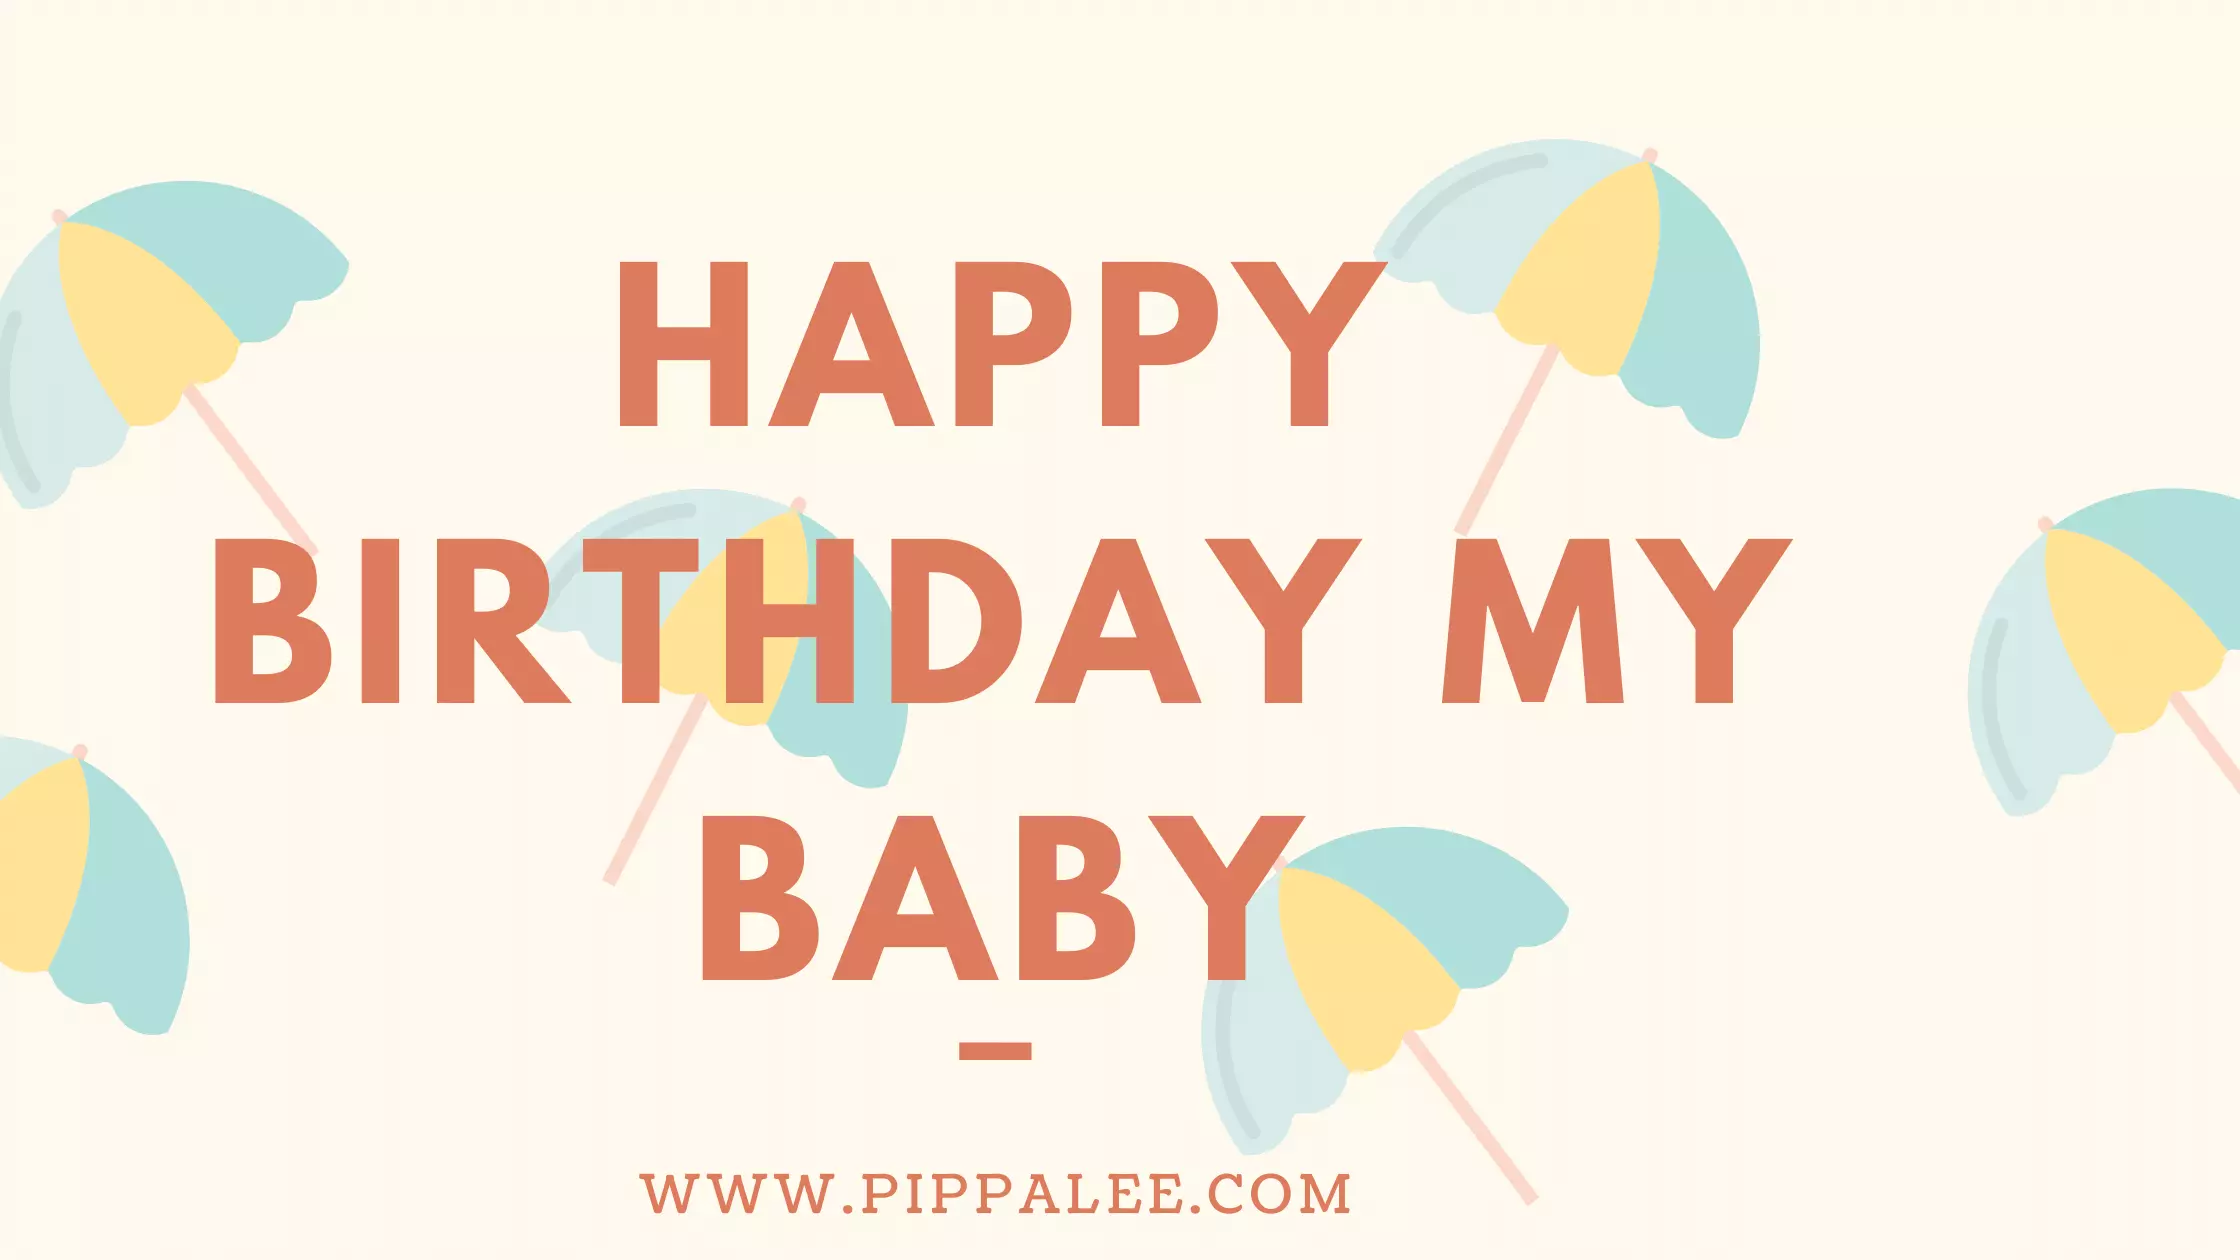 Happy Birthday My Baby - Ultimate List of Wishes